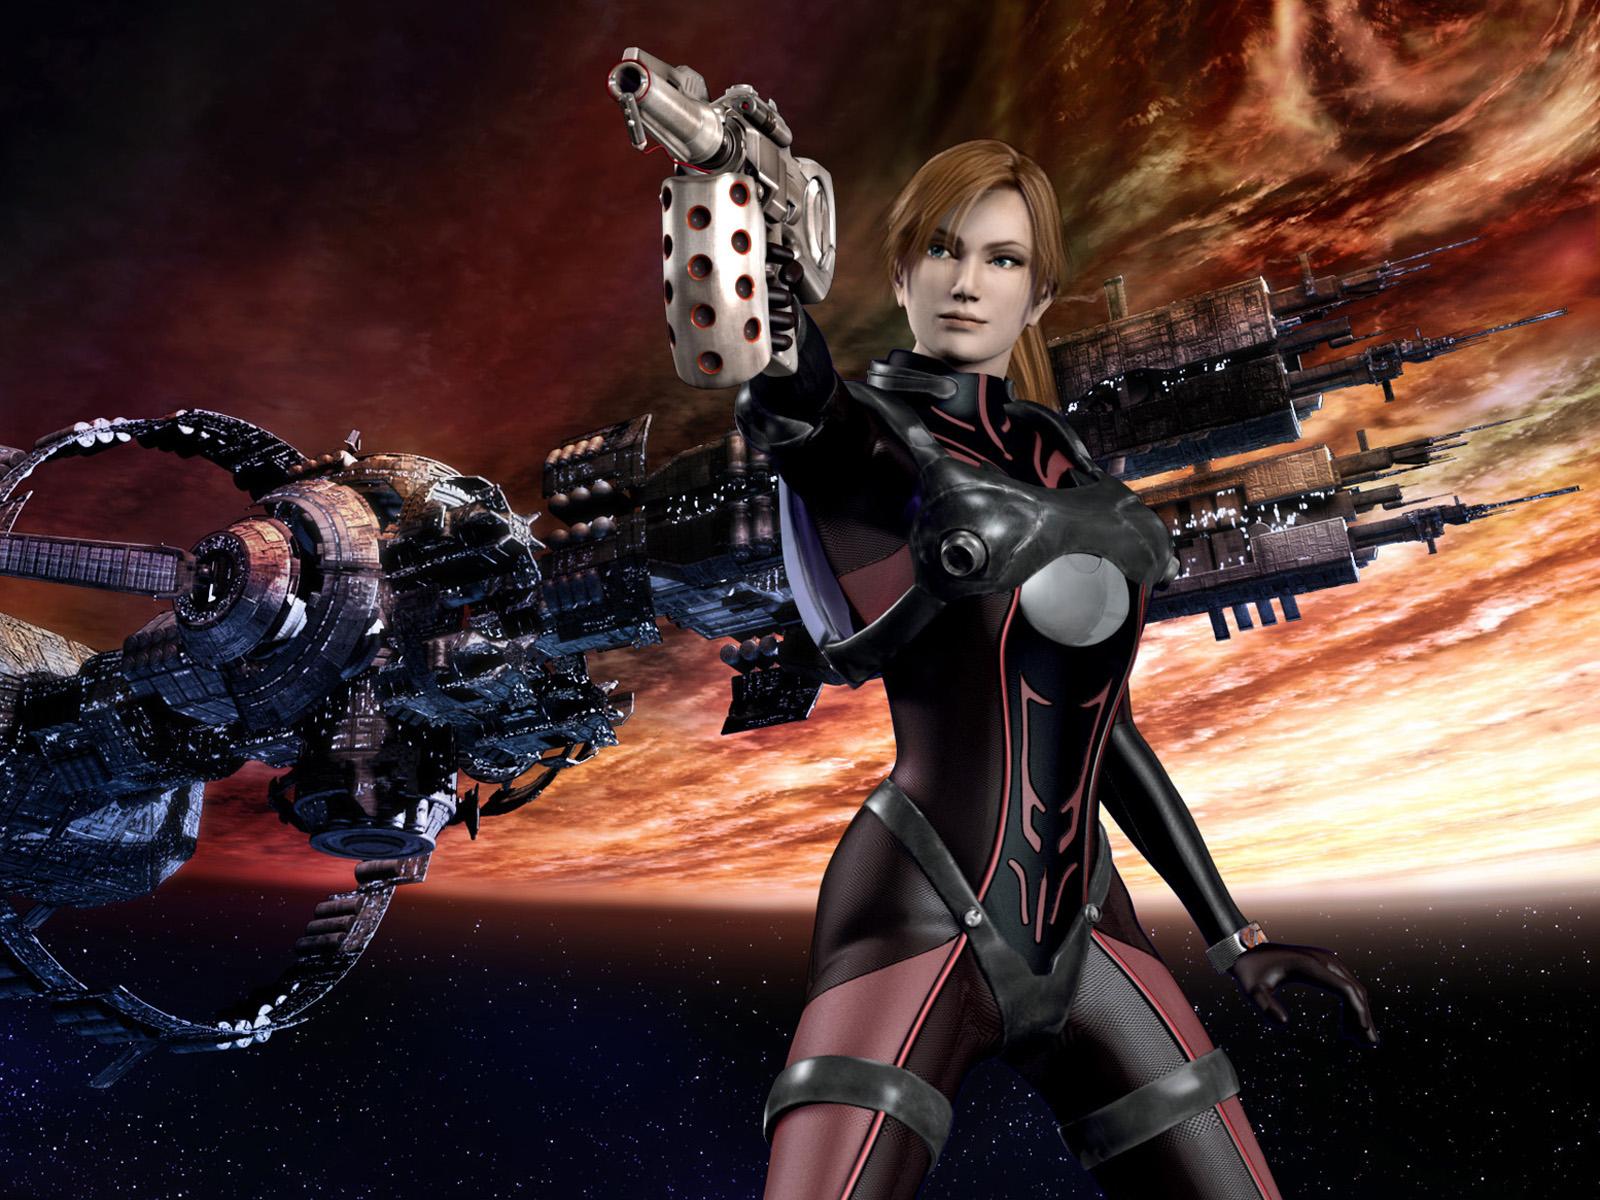 Video Game Dino Crisis HD Wallpaper | Background Image